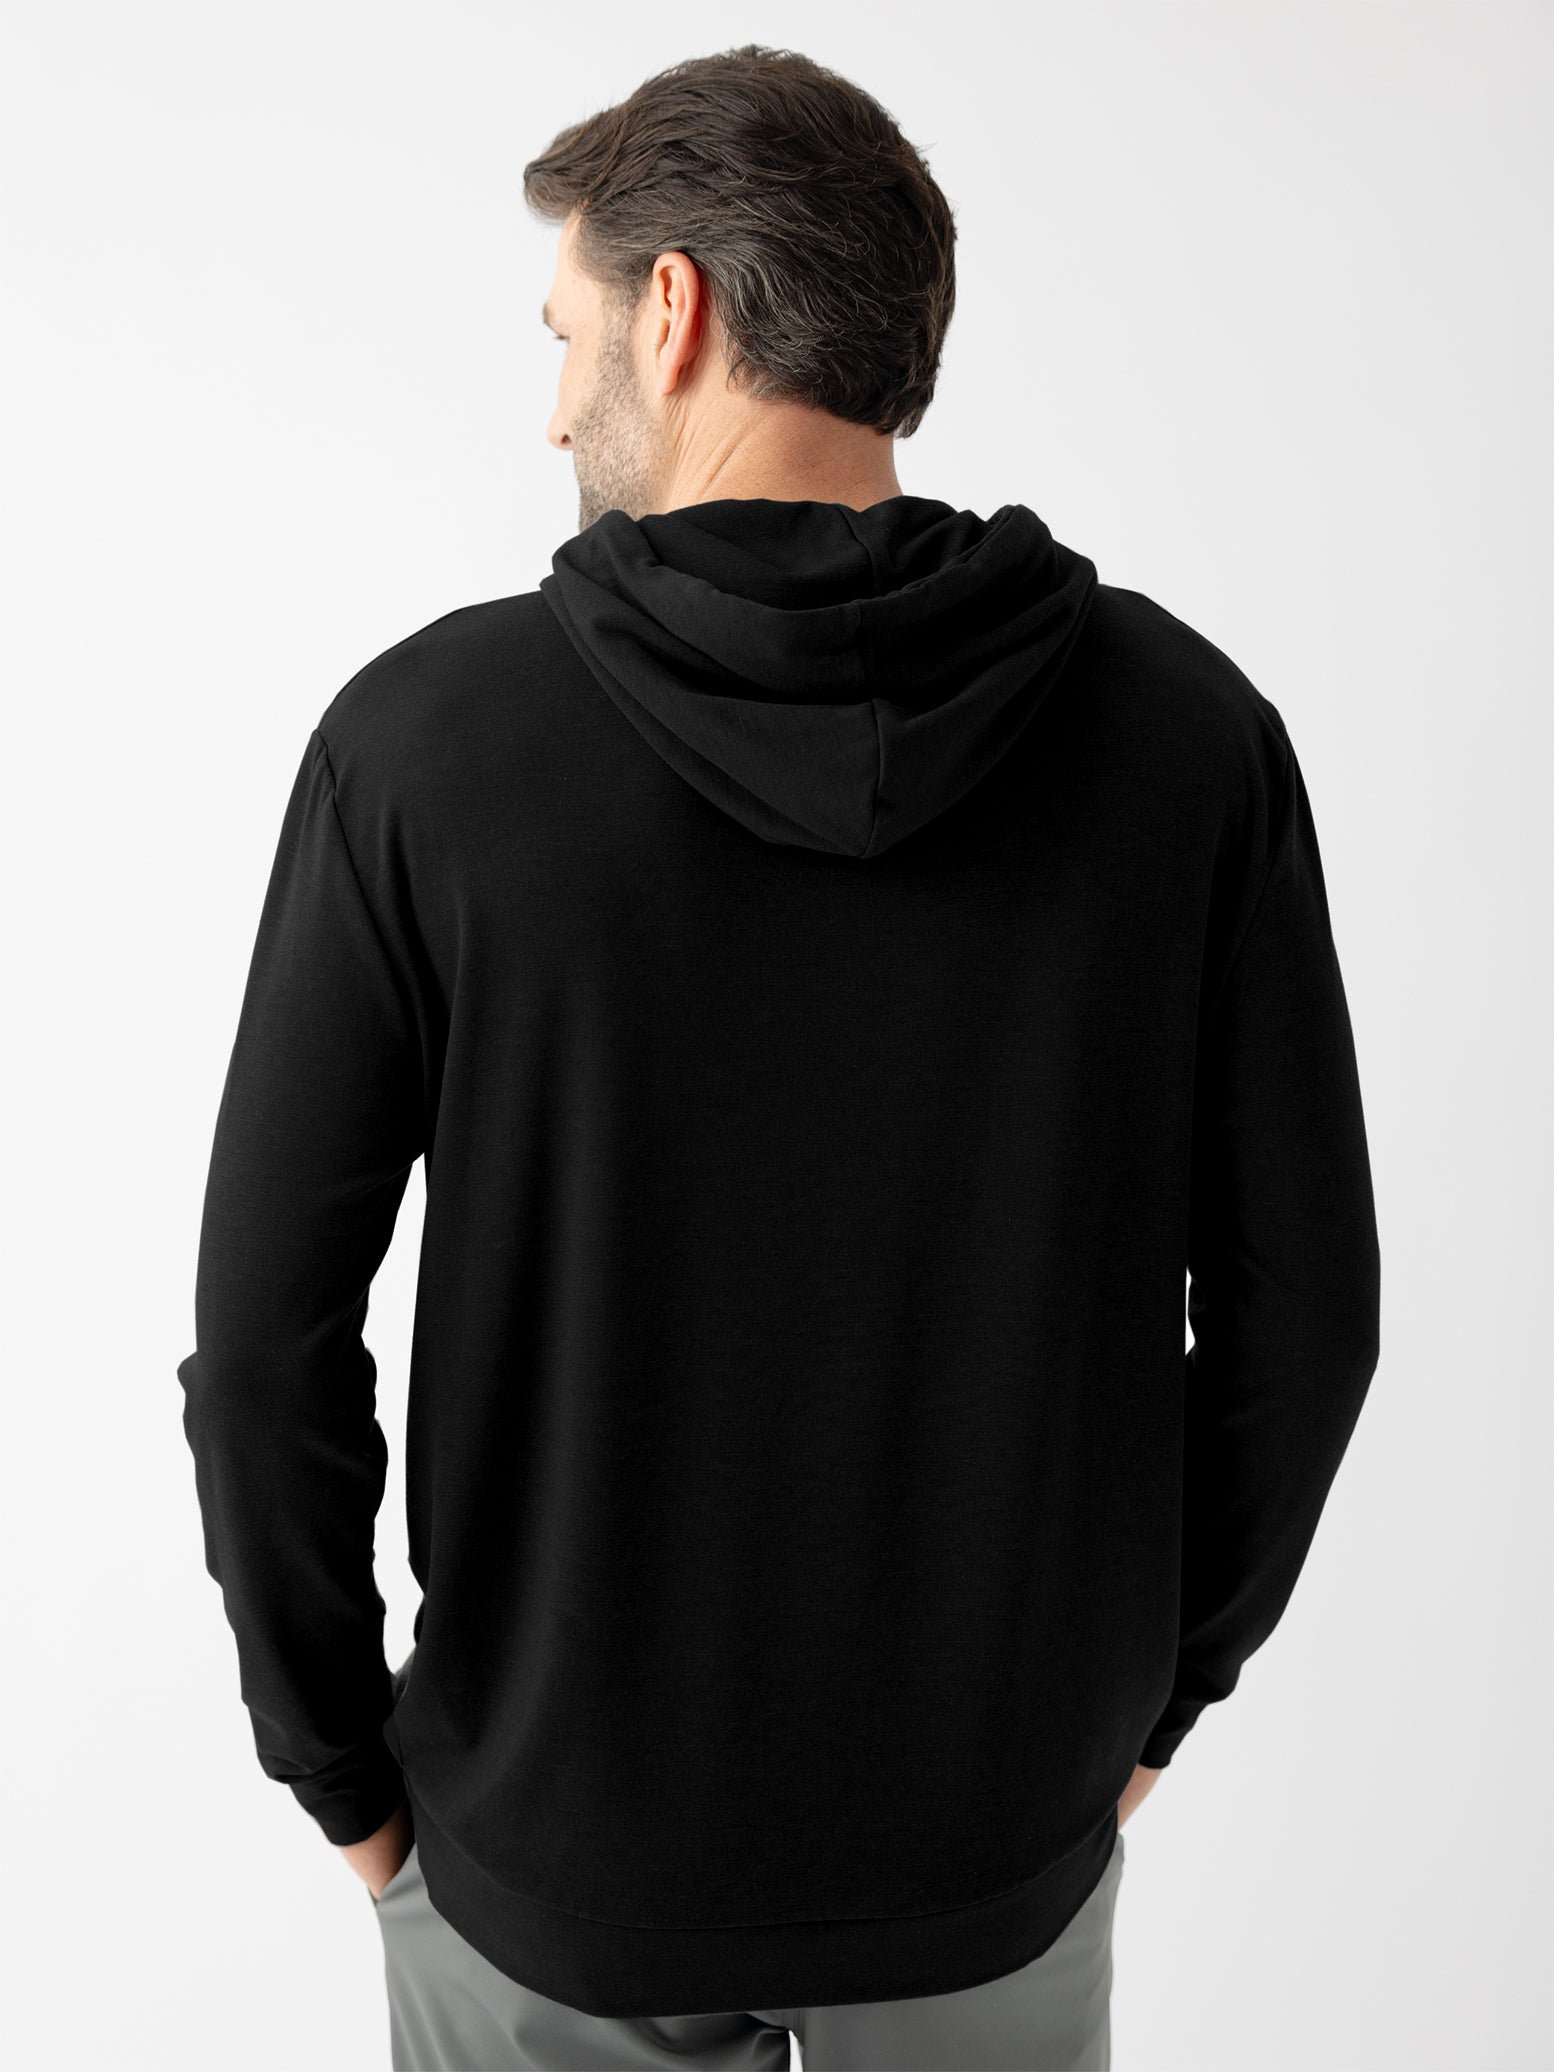 Back of man wearing black hoodie with white background 